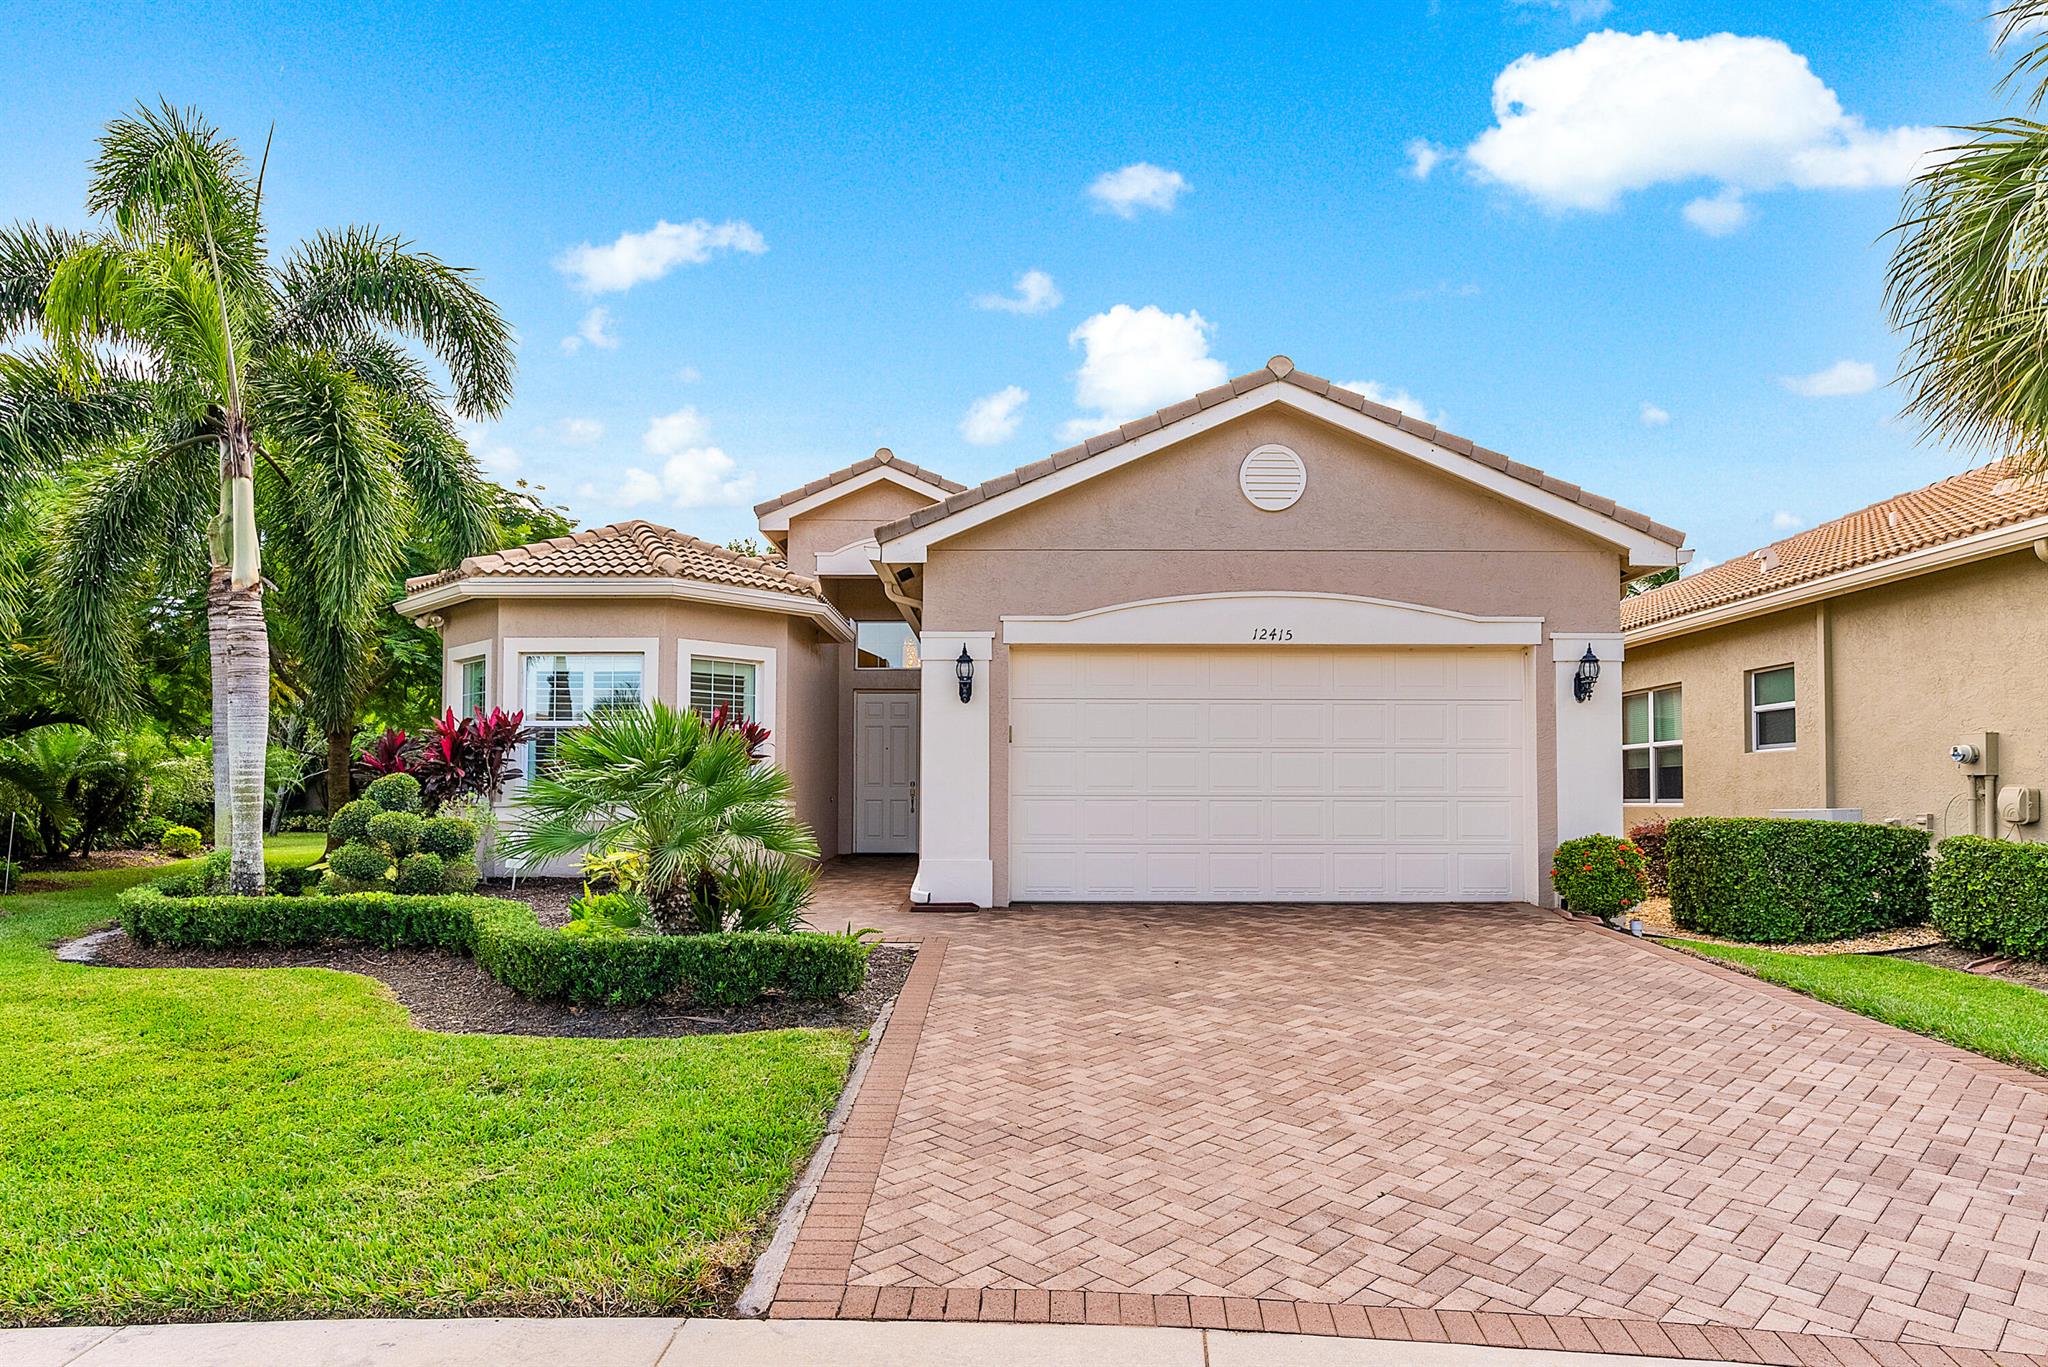 This beautifully appointed Bimini model has a popular open floor plan.The 3/3+den sits in a cul-de-sac on a lushly landscaped,private,oversized (almost 1/3 acre) pie-shaped home site.Features include impact windows,new a/c unit,central vac,designer window treatments,plantation shutters,magnificent light fixtures,fans,hi-hats and upgraded baths!Porcelain tile has been installed on the diagonal in the main living areas.The gourmet kitchen has wood cabinets,granite countertops,glass tile backsplash,snack bar with pendant lights,breakfast area and much more!The double oven has convection cooking.The kitchen is open to the dining room and to the great room with built-in entertainment center.Large master suite with luxurious bath.You'll love the L-Shaped covered patio and large private lot. Valencia Cove is a premier 55+ lifestyle community featuring a spectacular 39,000 square-foot clubhouse and 10 acre outdoor recreational facility. Endless activities and opportunities for fun abound - there are activities, trips, shows, and clubs of all types. The clubhouse features an expansive foyer and lobby, grand ballroom with raised stage and dance floor, four spacious card rooms, Cafe with indoor/outdoor seating, Arts and crafts room with kiln, Internet/Billiards room, Office, Catering kitchen with separate demonstration cooking studio, Yoga &amp; exercise studio with ping pong, fully equipped fitness center and men's and women's locker rooms with steam rooms, massage room and showers. There are four pools - a beautiful Resort-style pool and Shade Pavilions, Lap pool with Swimmers' Lap Lanes, Resistance walking pool, Grandchildren's wading pool, and an Outdoor whirlpool spa. There are eight har-tru tennis courts with shade pavilions and lighting for night play, tennis pro shop, tennis pro, league play, four pickleball courts (two more will be built), pickleball pro, league play, 2 bocce courts, league play, half-court basketball and walking/jogging/biking paths throughout and just outside the community. Valencia Cove is conveniently located near shopping, restaurants, houses of worship and major highways!